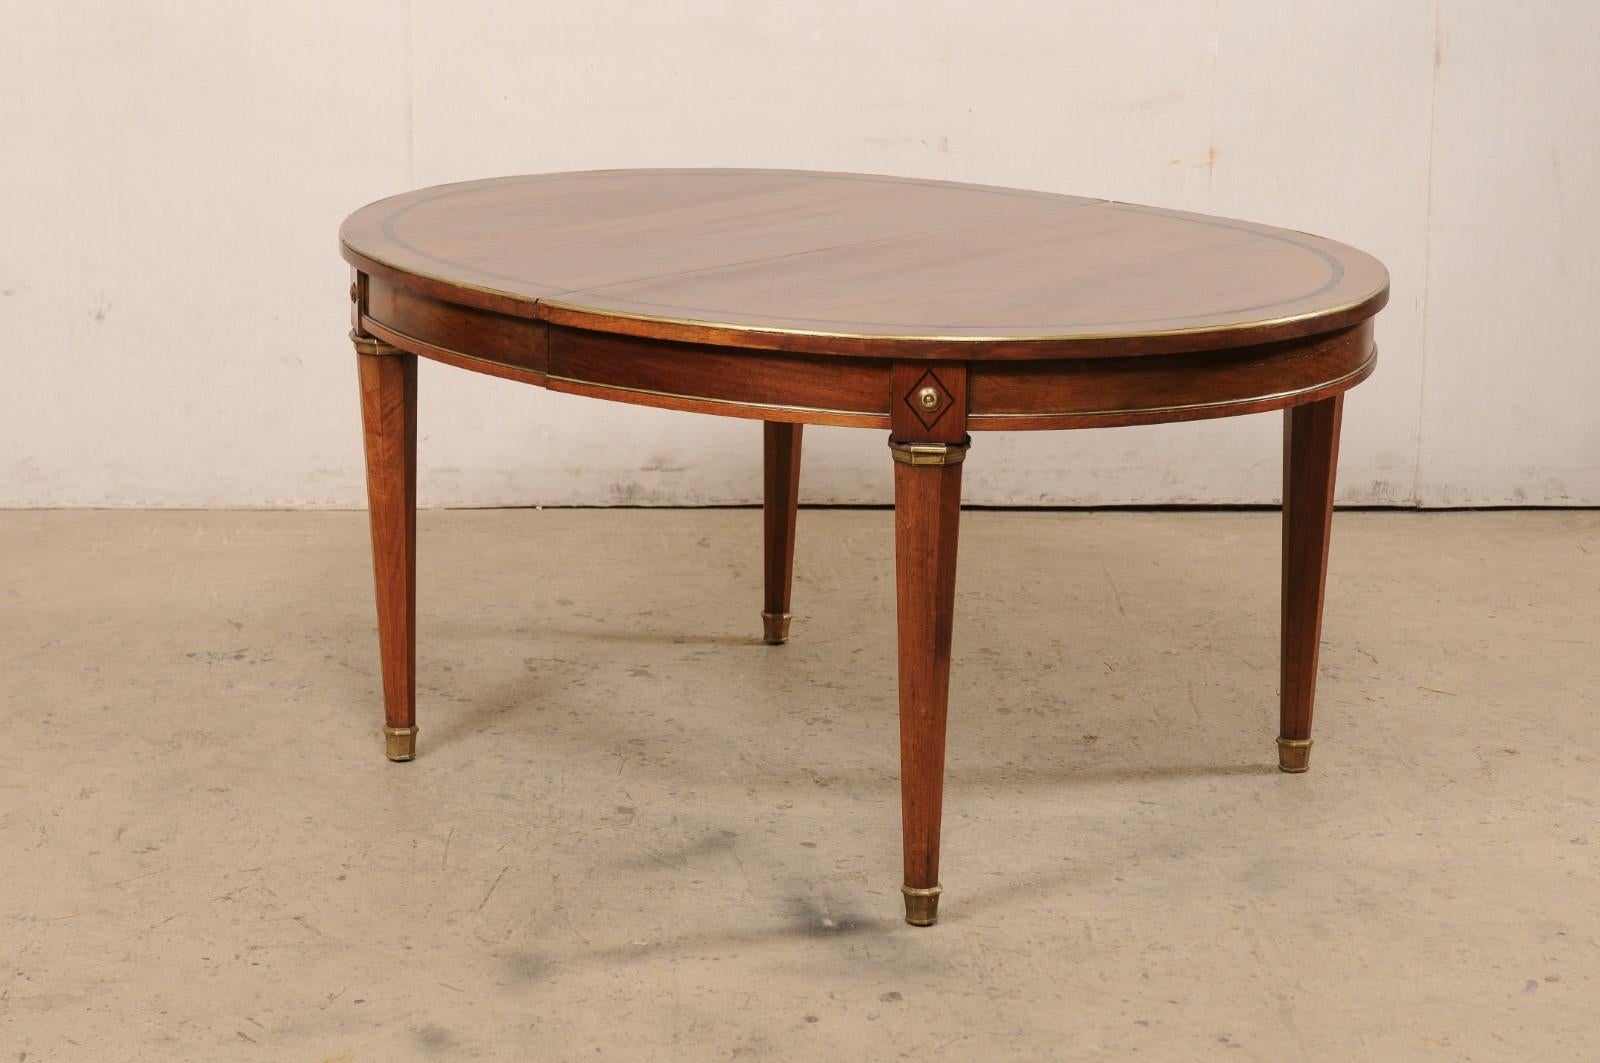 French Neoclassic Style Oval Table with Brass Trim & Accents '1 Leaf Extension' For Sale 4